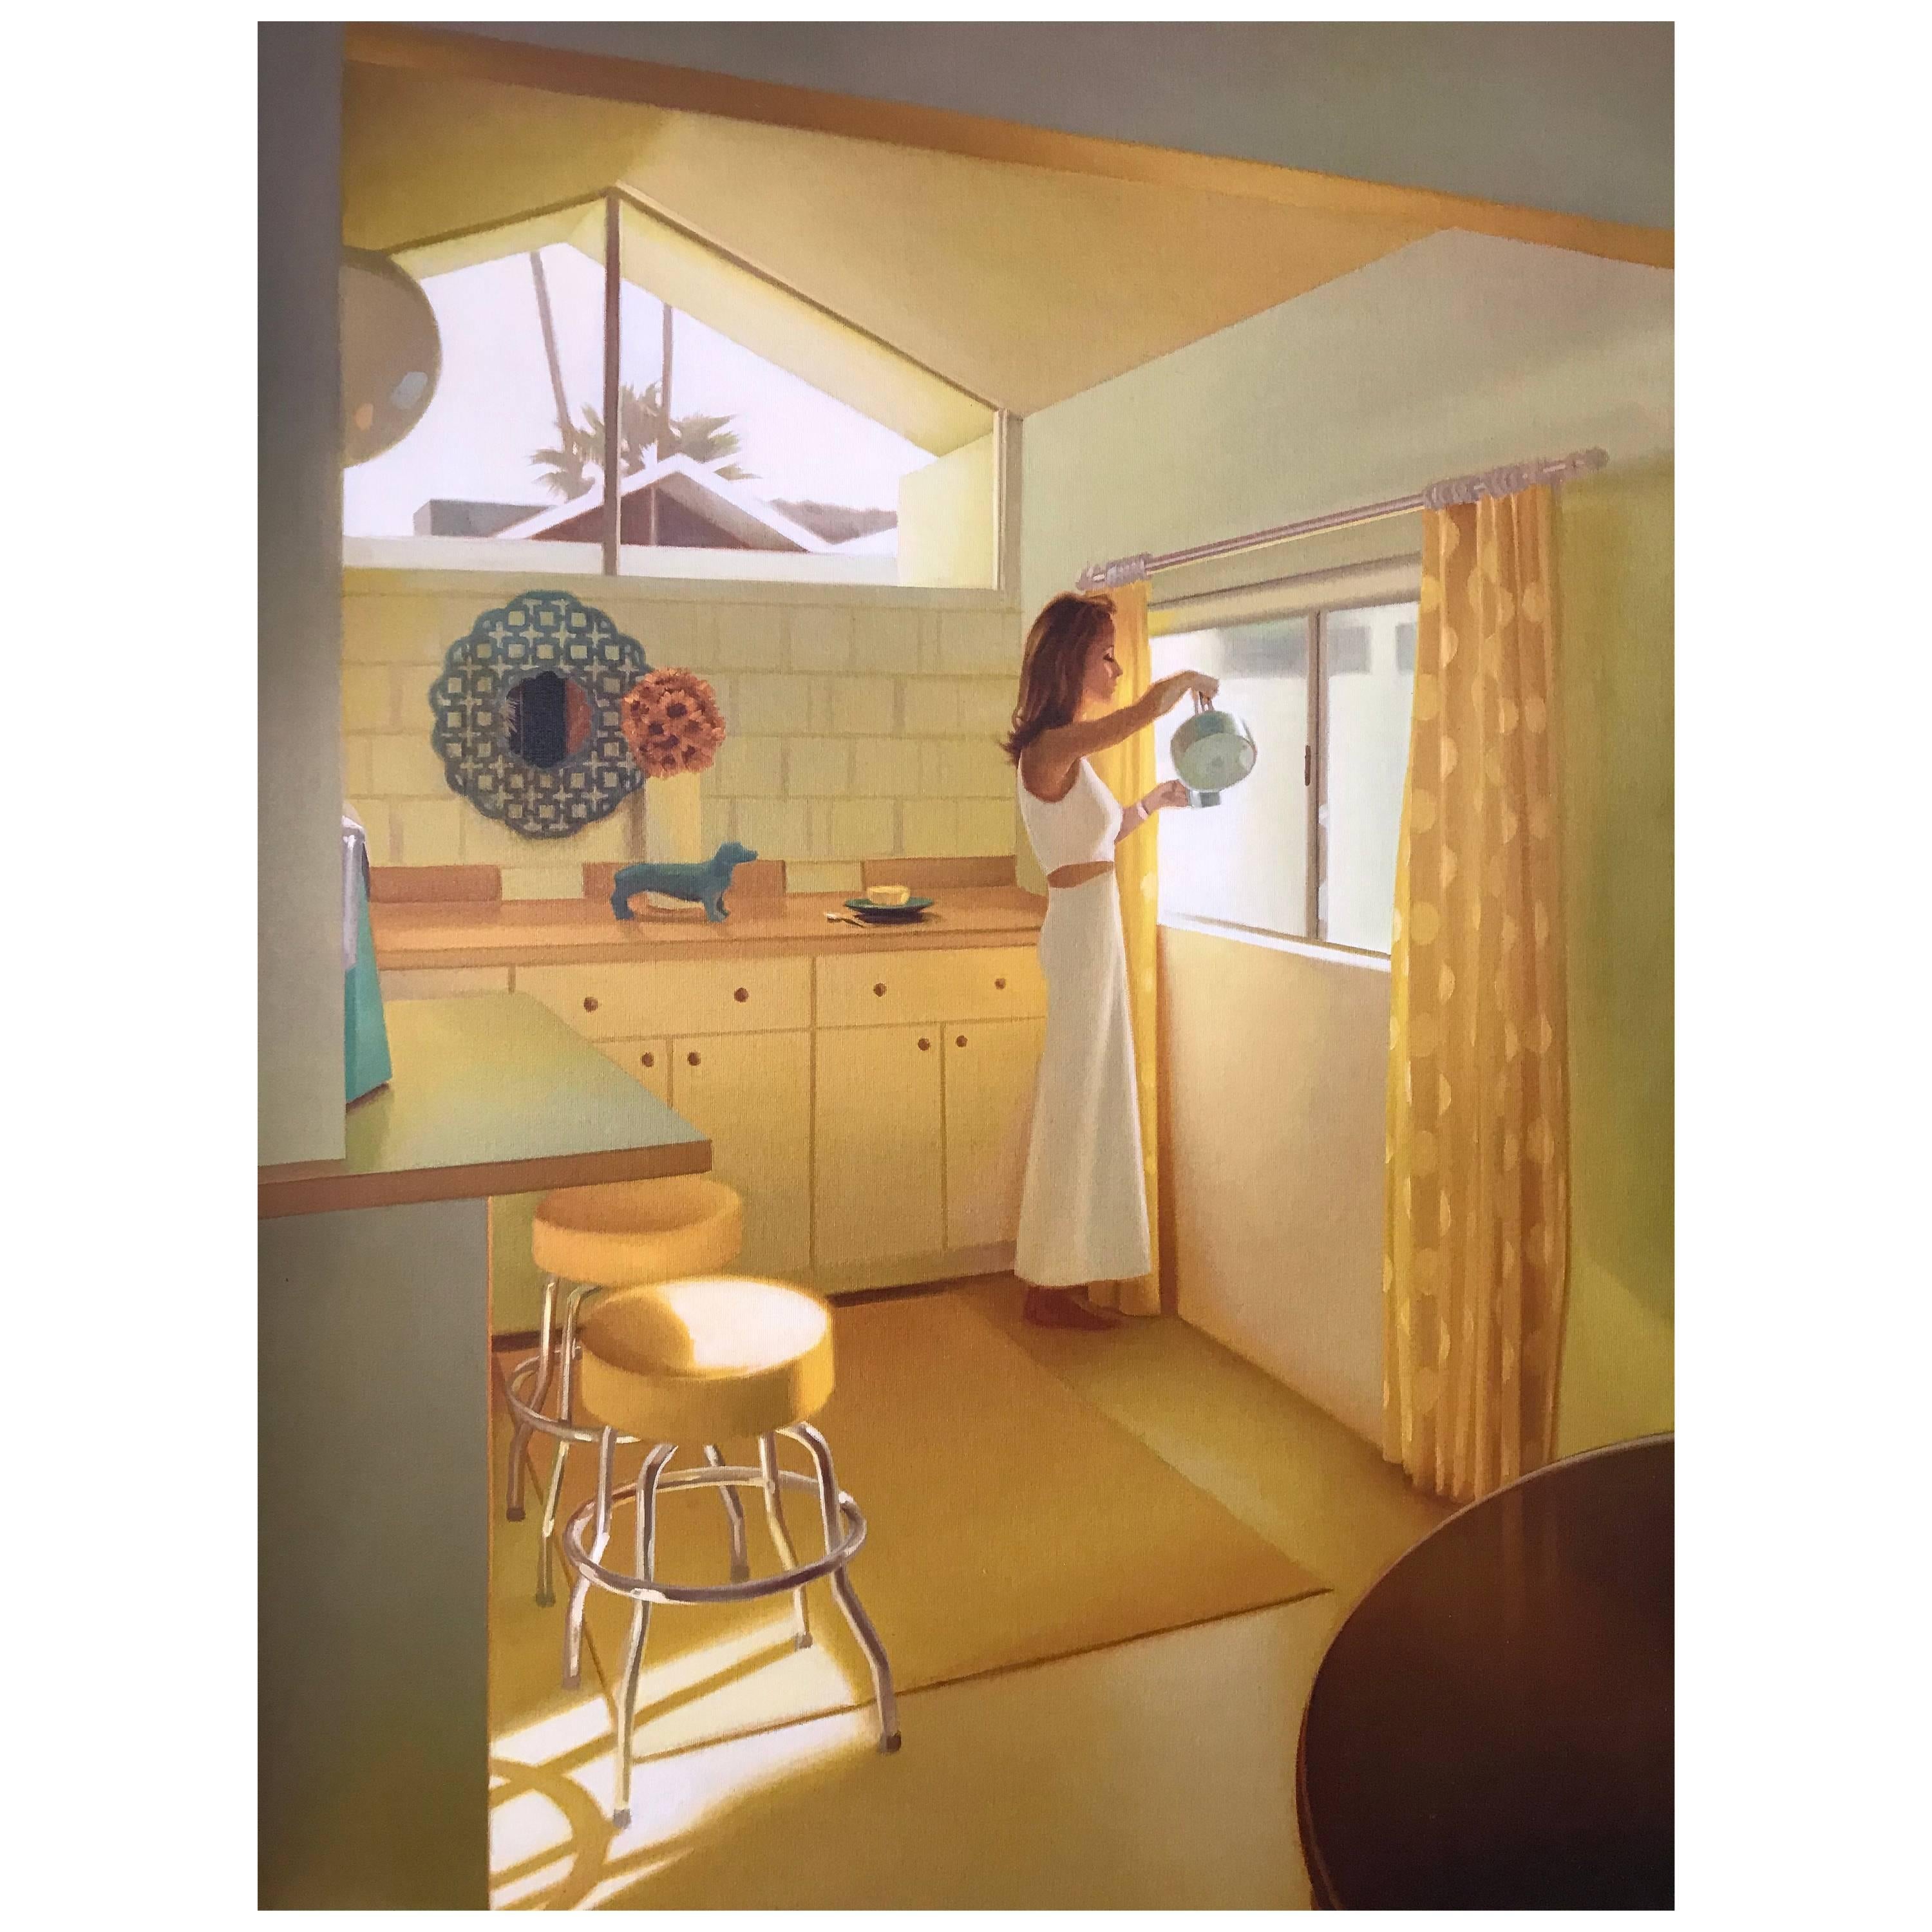 Giclee Print by Listed Artist Carrie Graber Palm Springs Modern Architecture